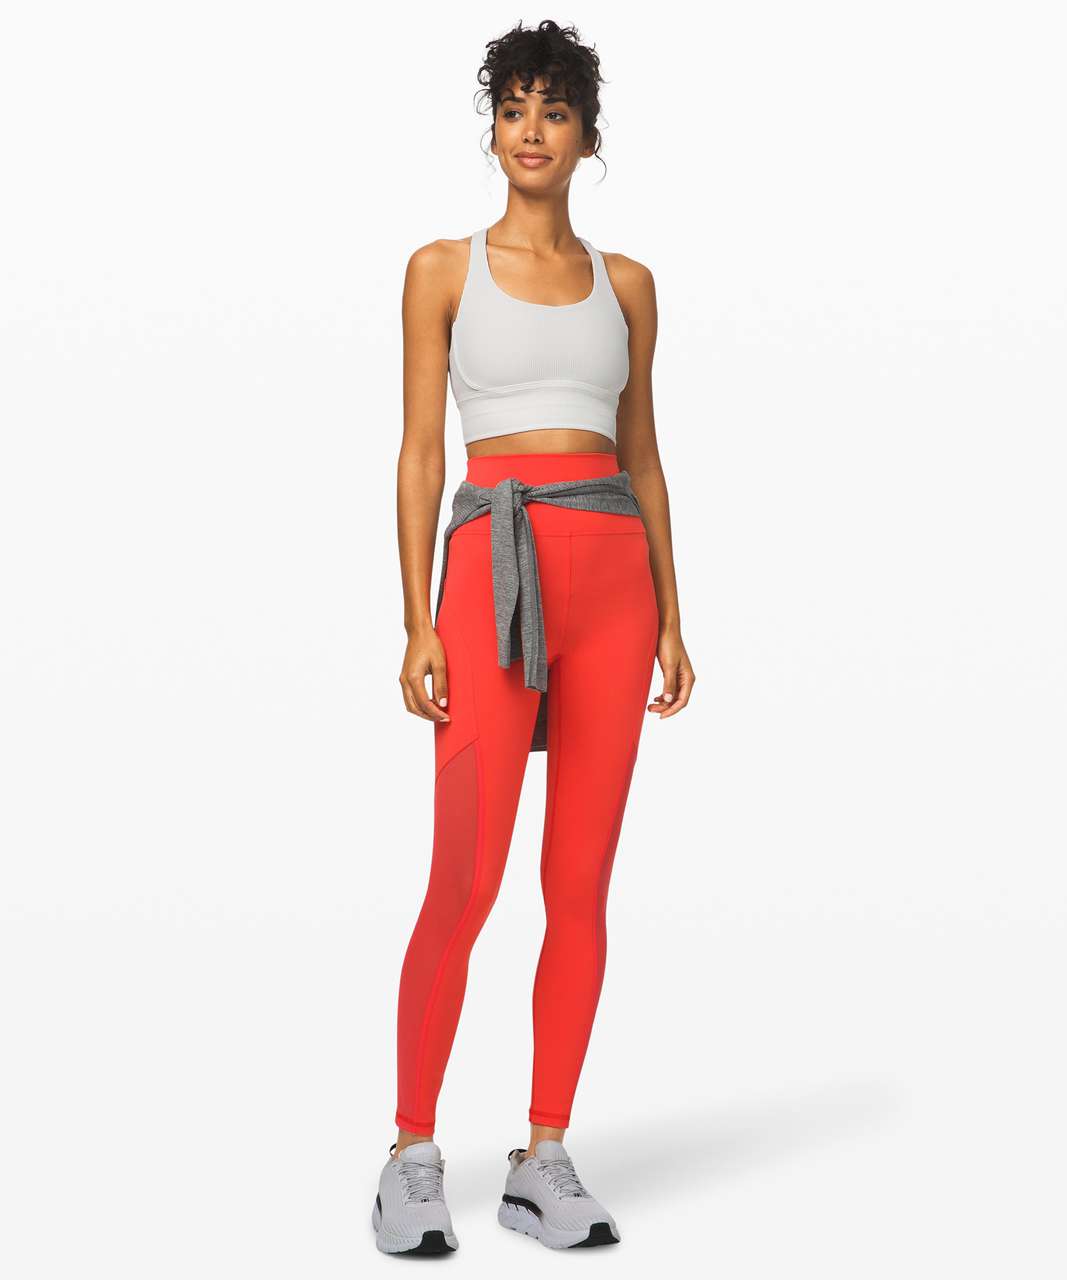 Lululemon Mastered Motion High-Rise Tight 28" - Thermal Red